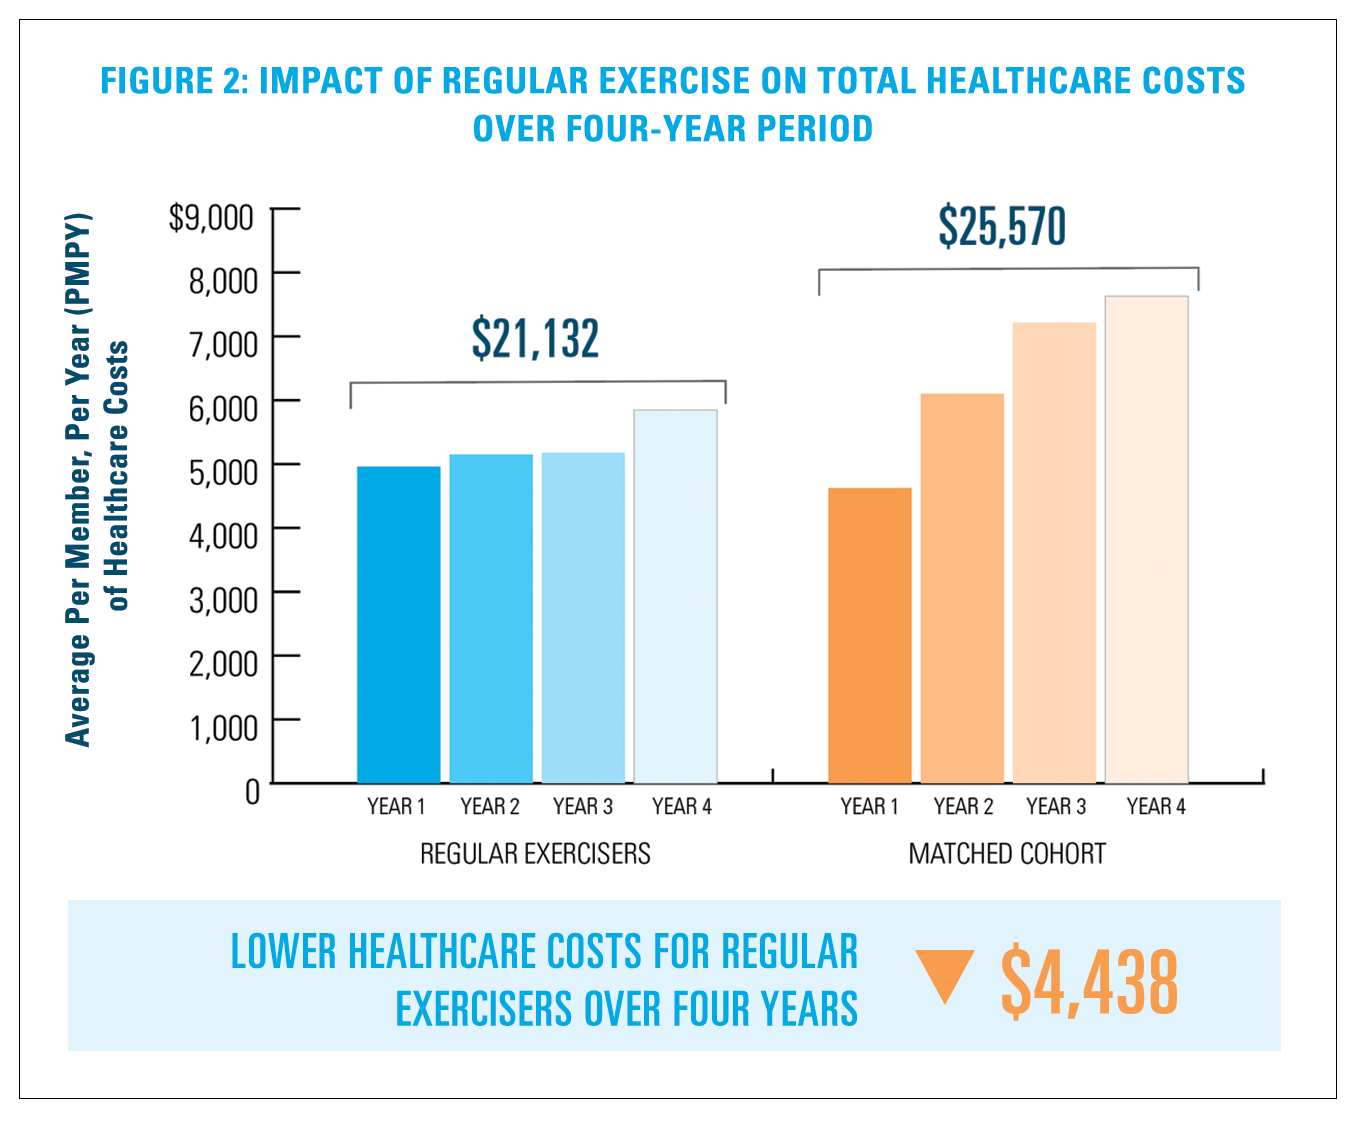 Figure 2: Impact of Regular Exercise on Total Healthcare Costs over Four Year Period